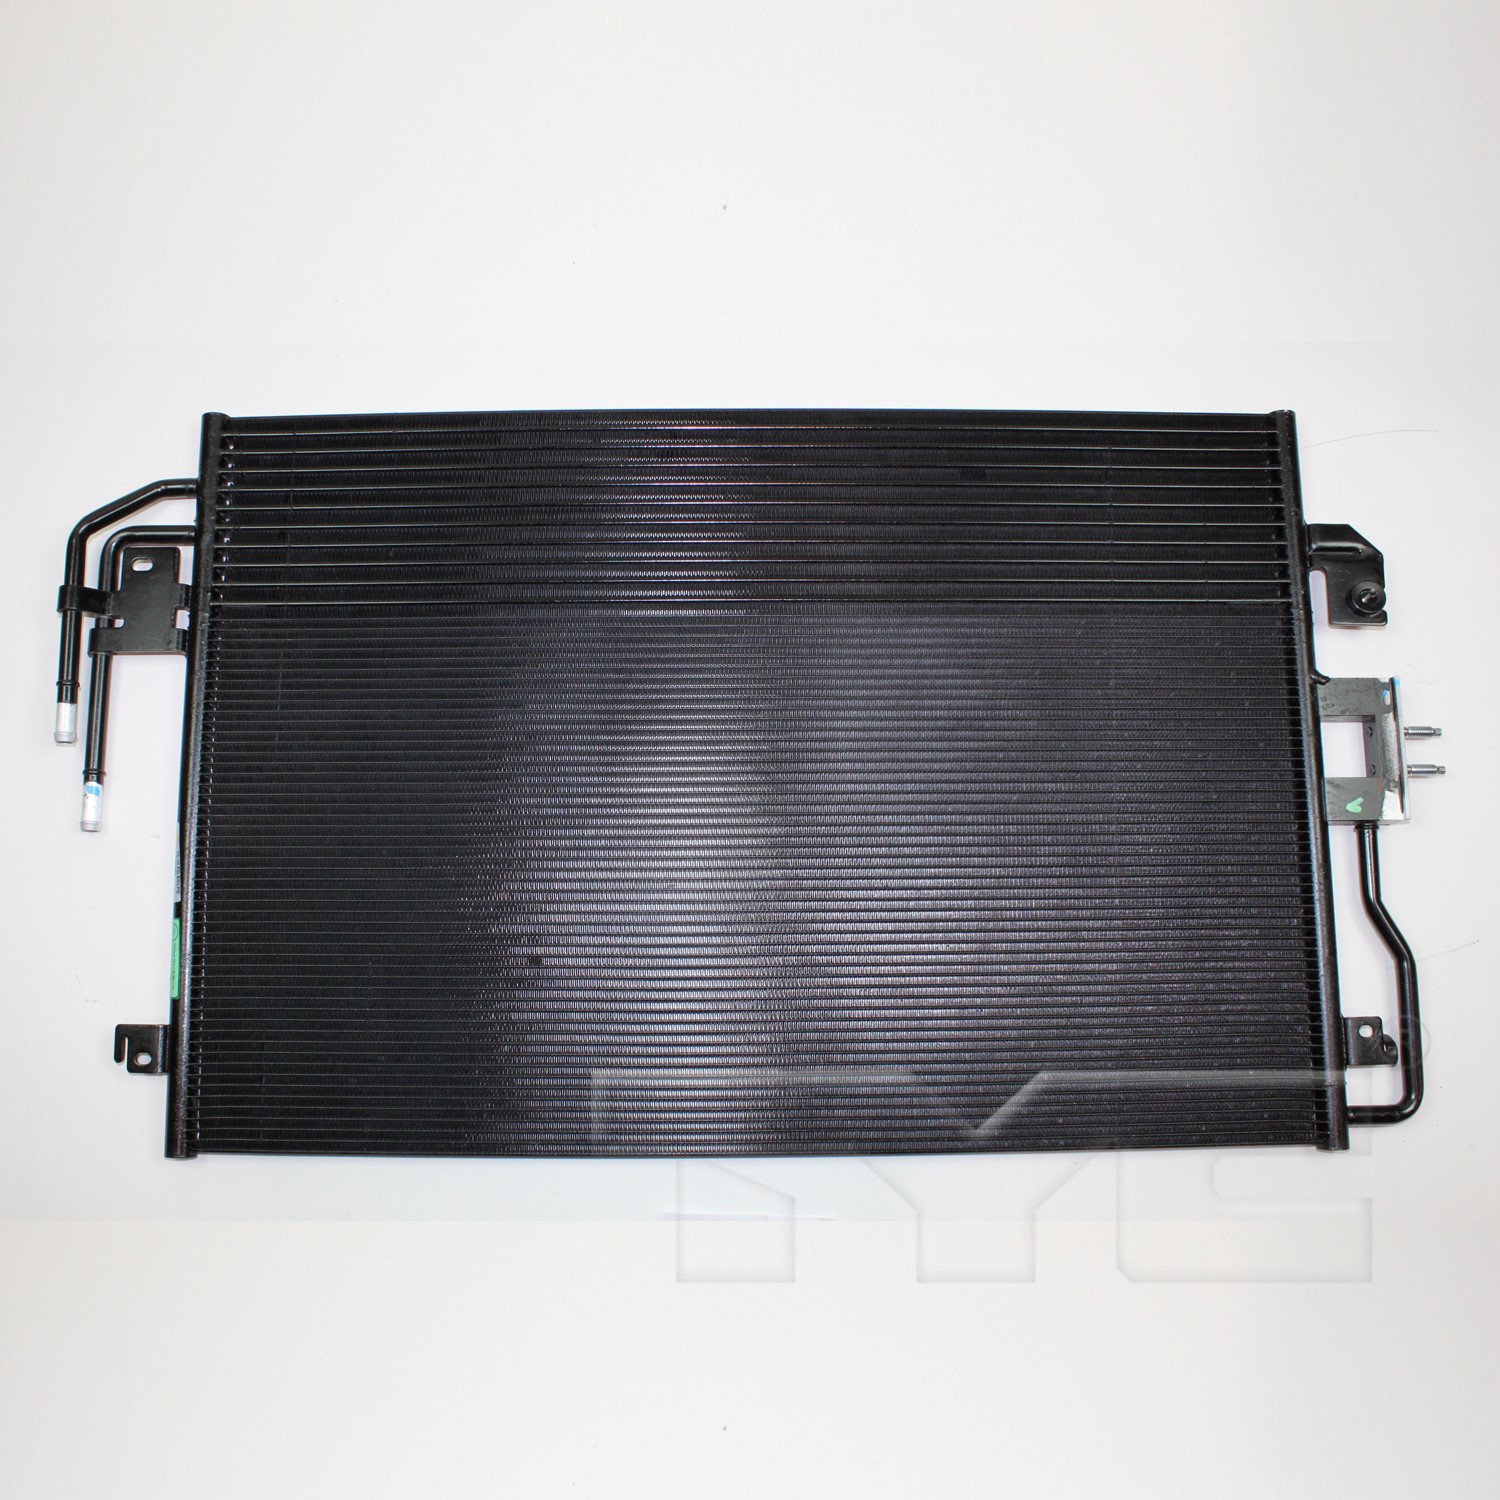 Aftermarket AC CONDENSERS for FORD - ESCAPE, ESCAPE,09-12,Air conditioning condenser